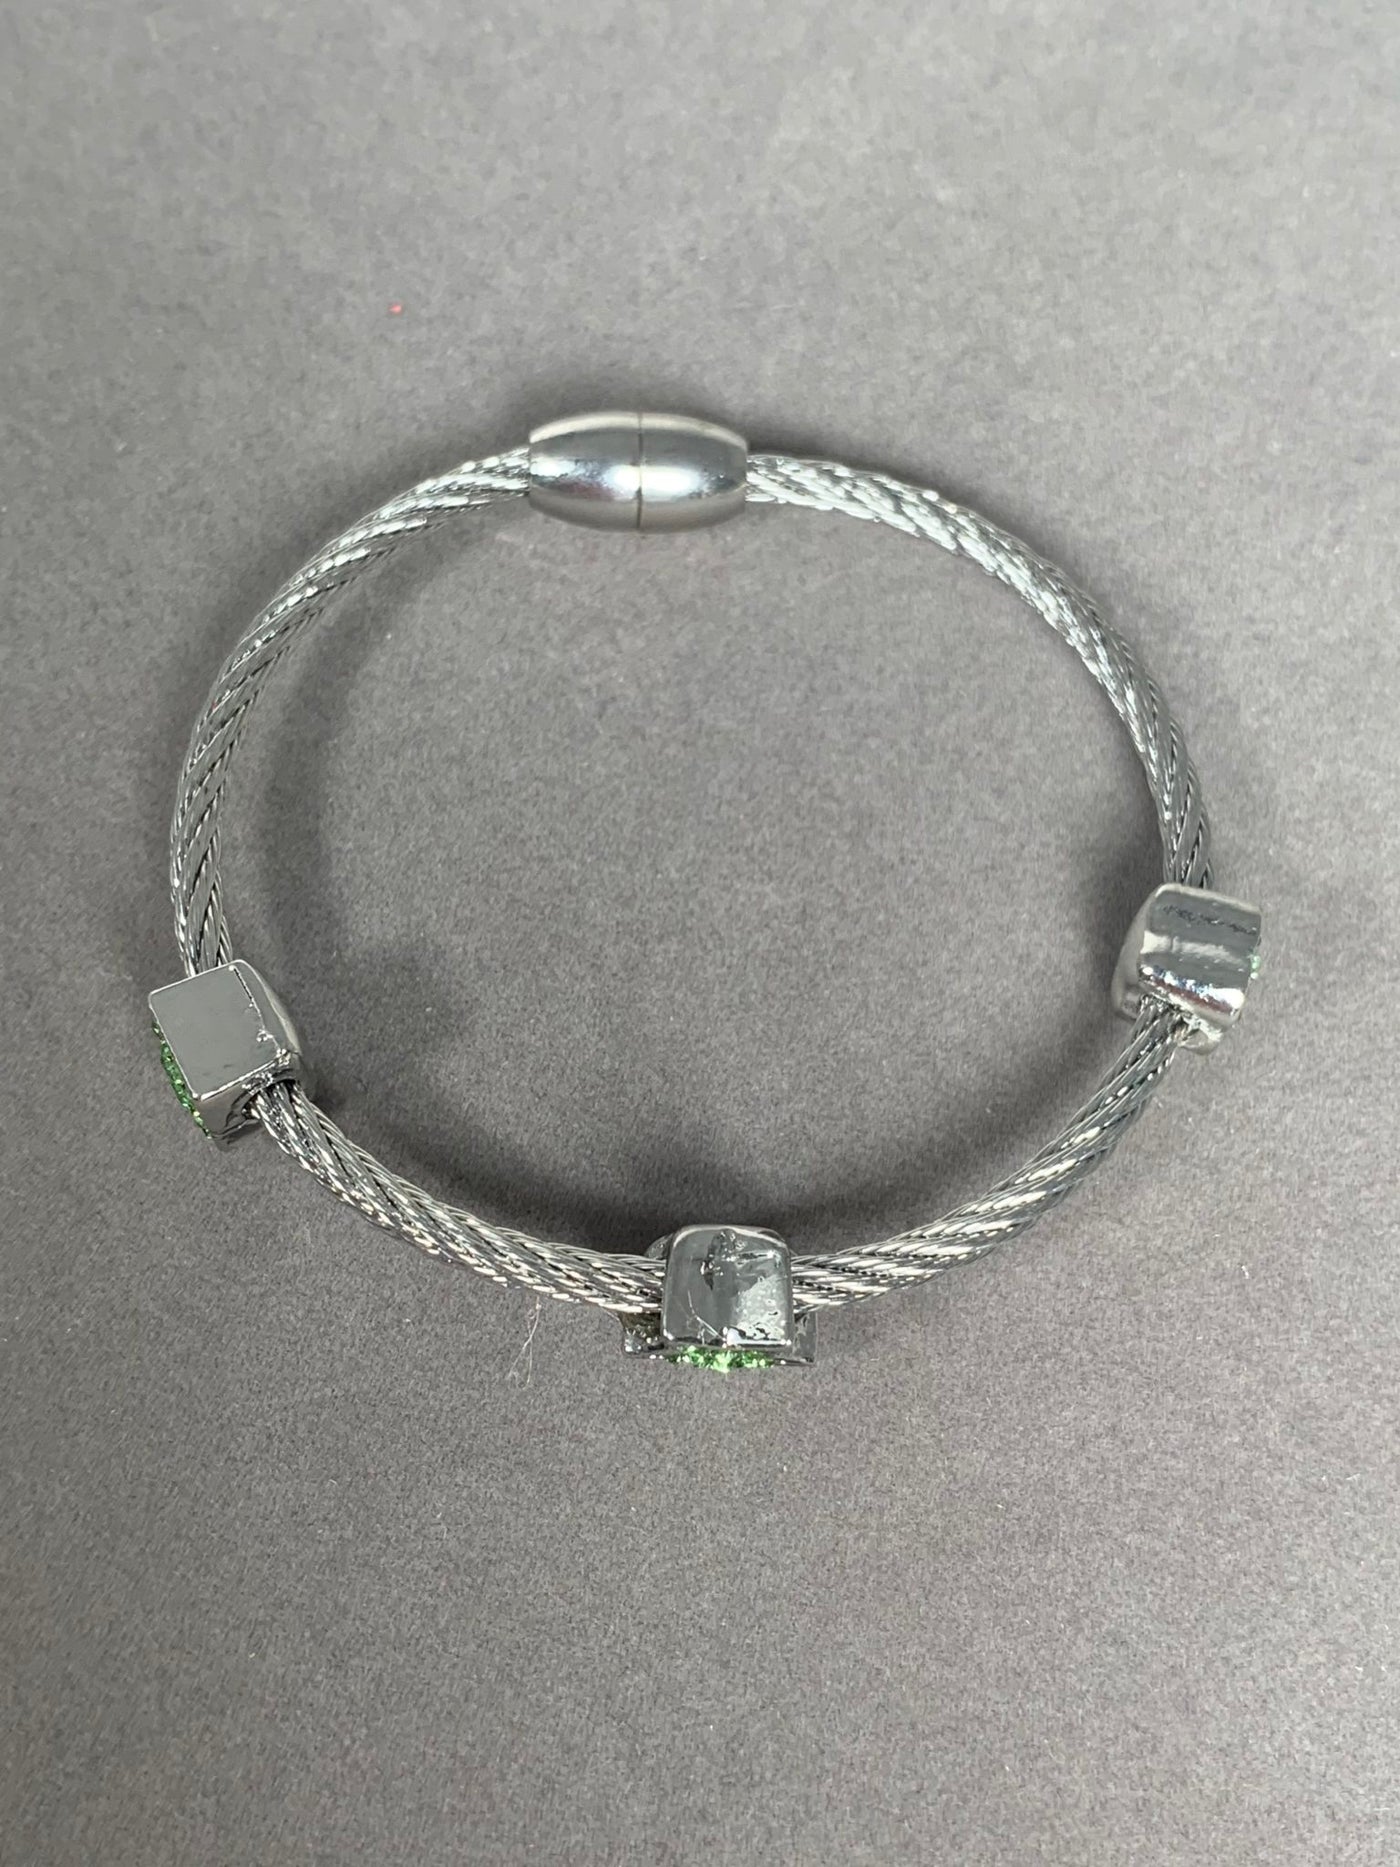 Silver Tone Wire Bangle Bracelet with 3 Green Crystal Motifs